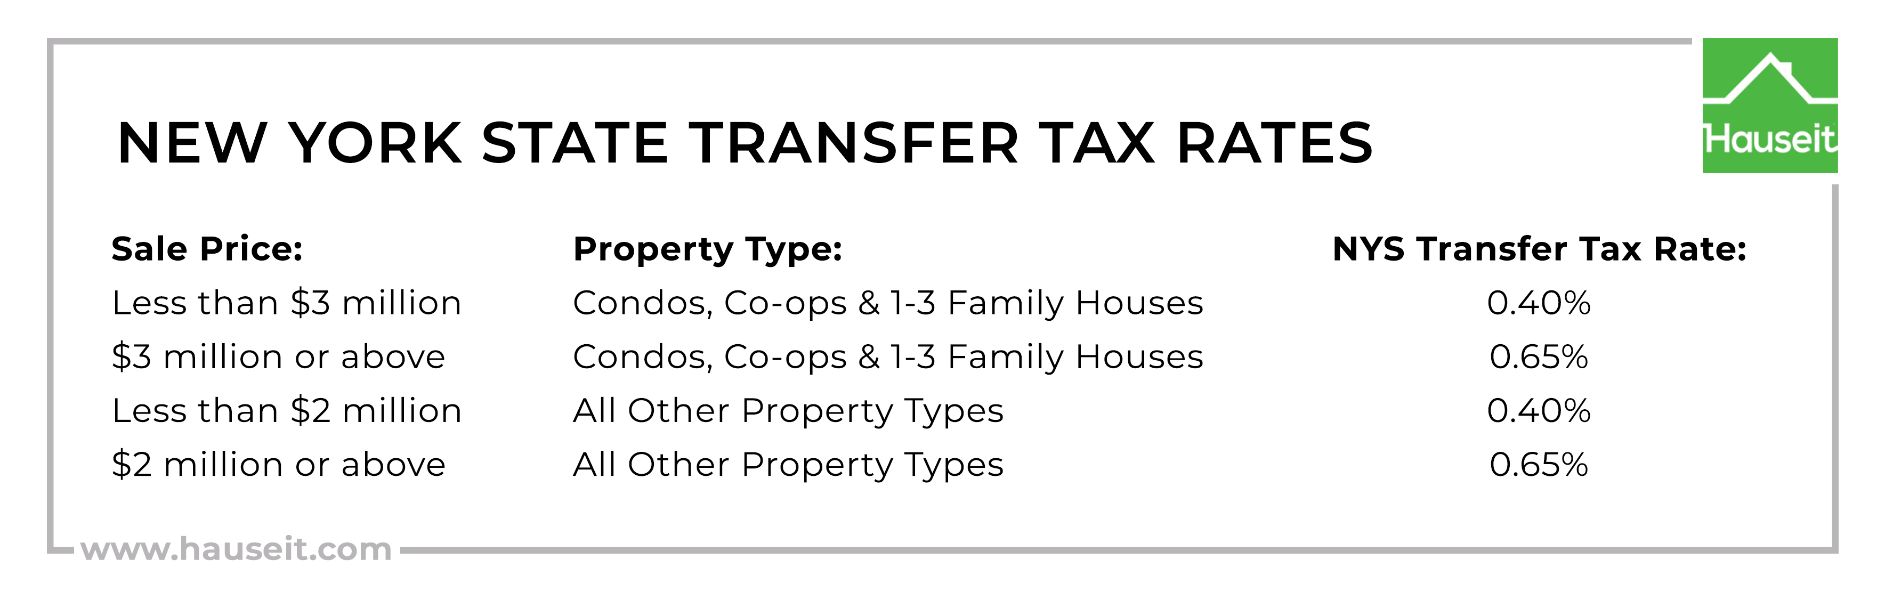 nyc-nys-seller-transfer-tax-of-1-4-to-2-075-hauseit